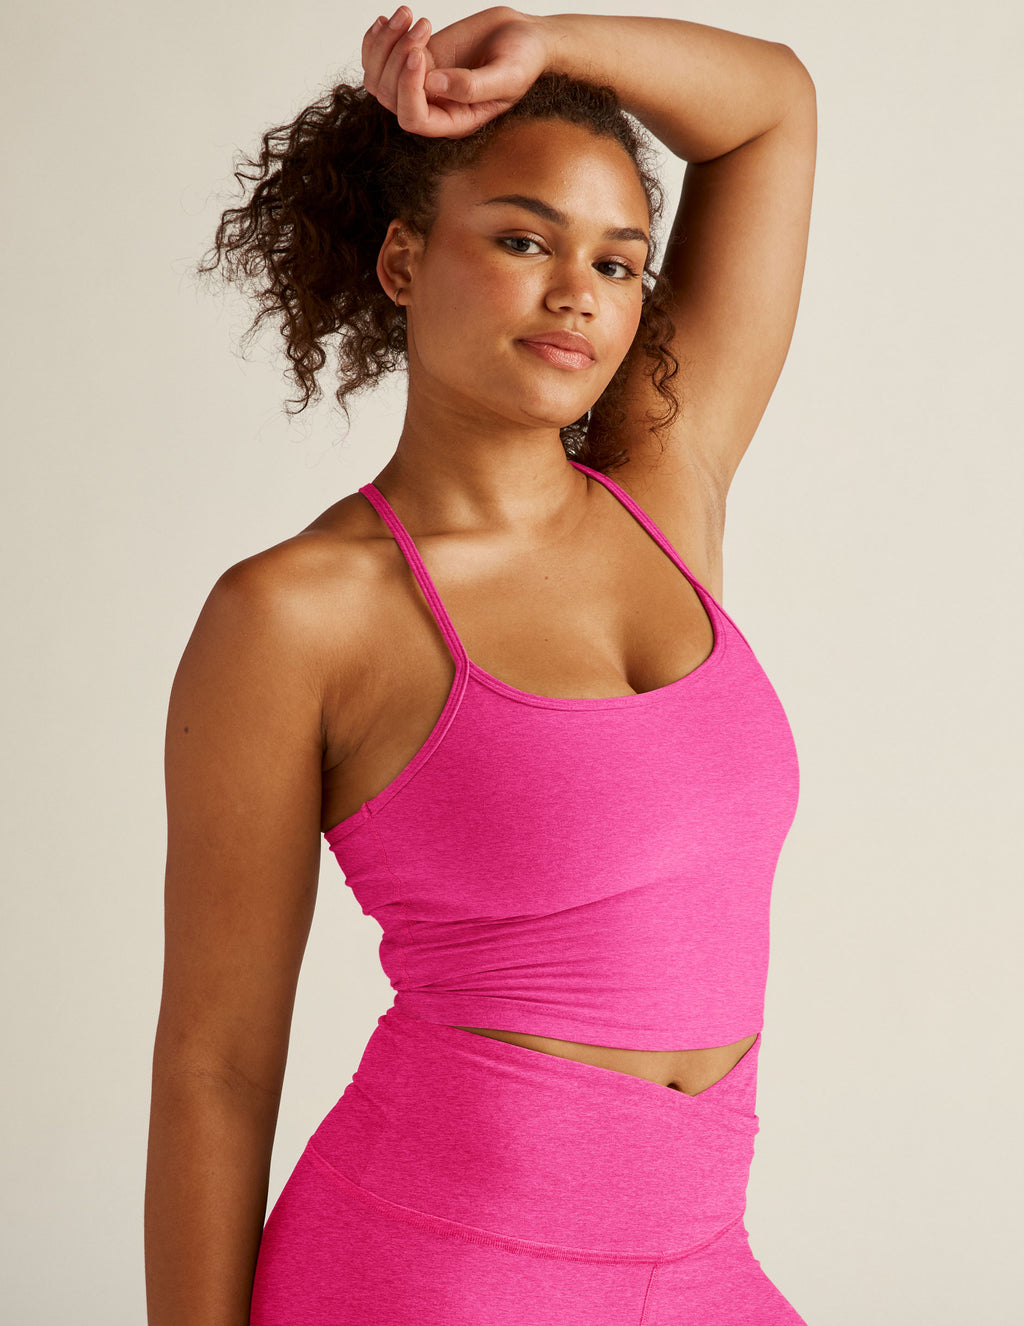 Summer Pink Yoga Clothes: LL Align Sleeveless Tank Top U Bra Crop Top In  Solid Color For Women From Abby5757, $5.64